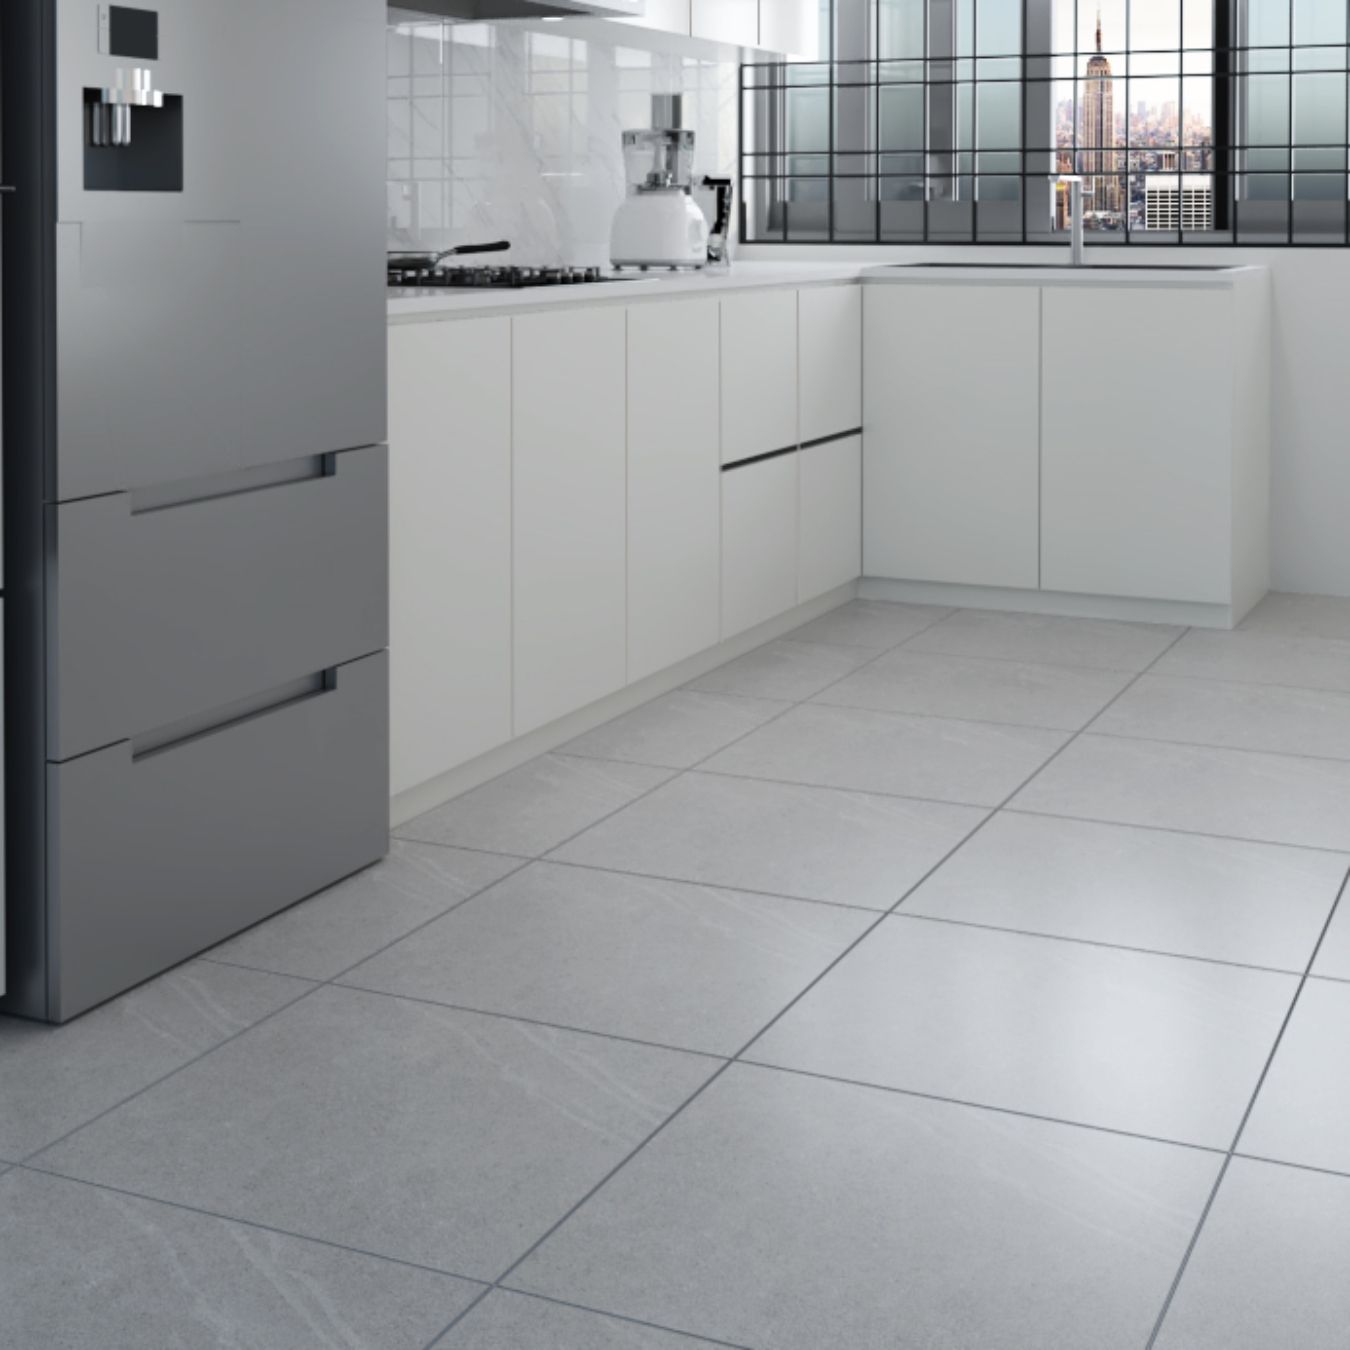 Contemporary Light-Coloured Flooring Design For Kitchens